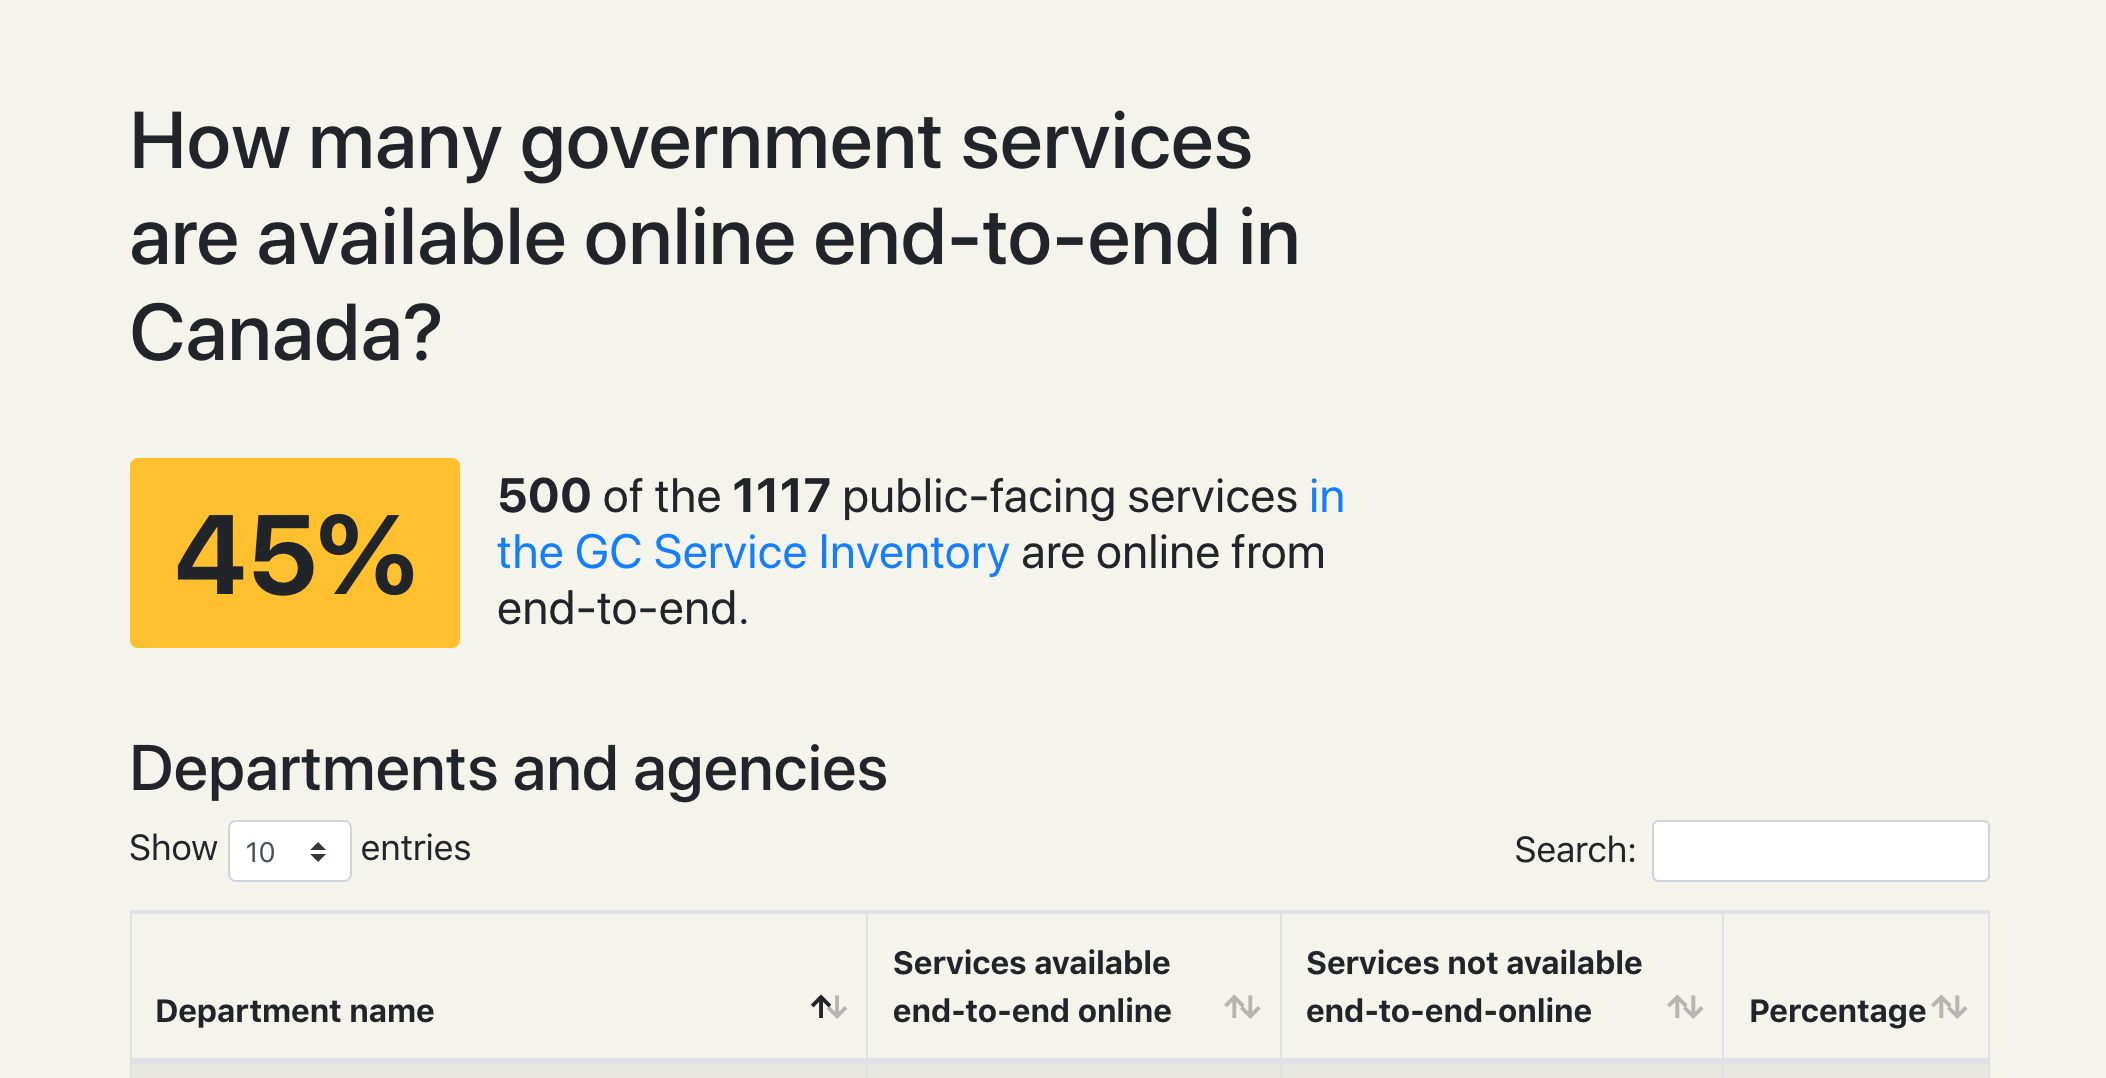 A screenshot of the “End-to-end services” analysis website, titled “How many government services are available online end-to-end in Canada?” and with an orange “45%” indicator below the heading, stating that 500 of the 1117 public-facing services in the GC Service Inventory are online from end-to-end.